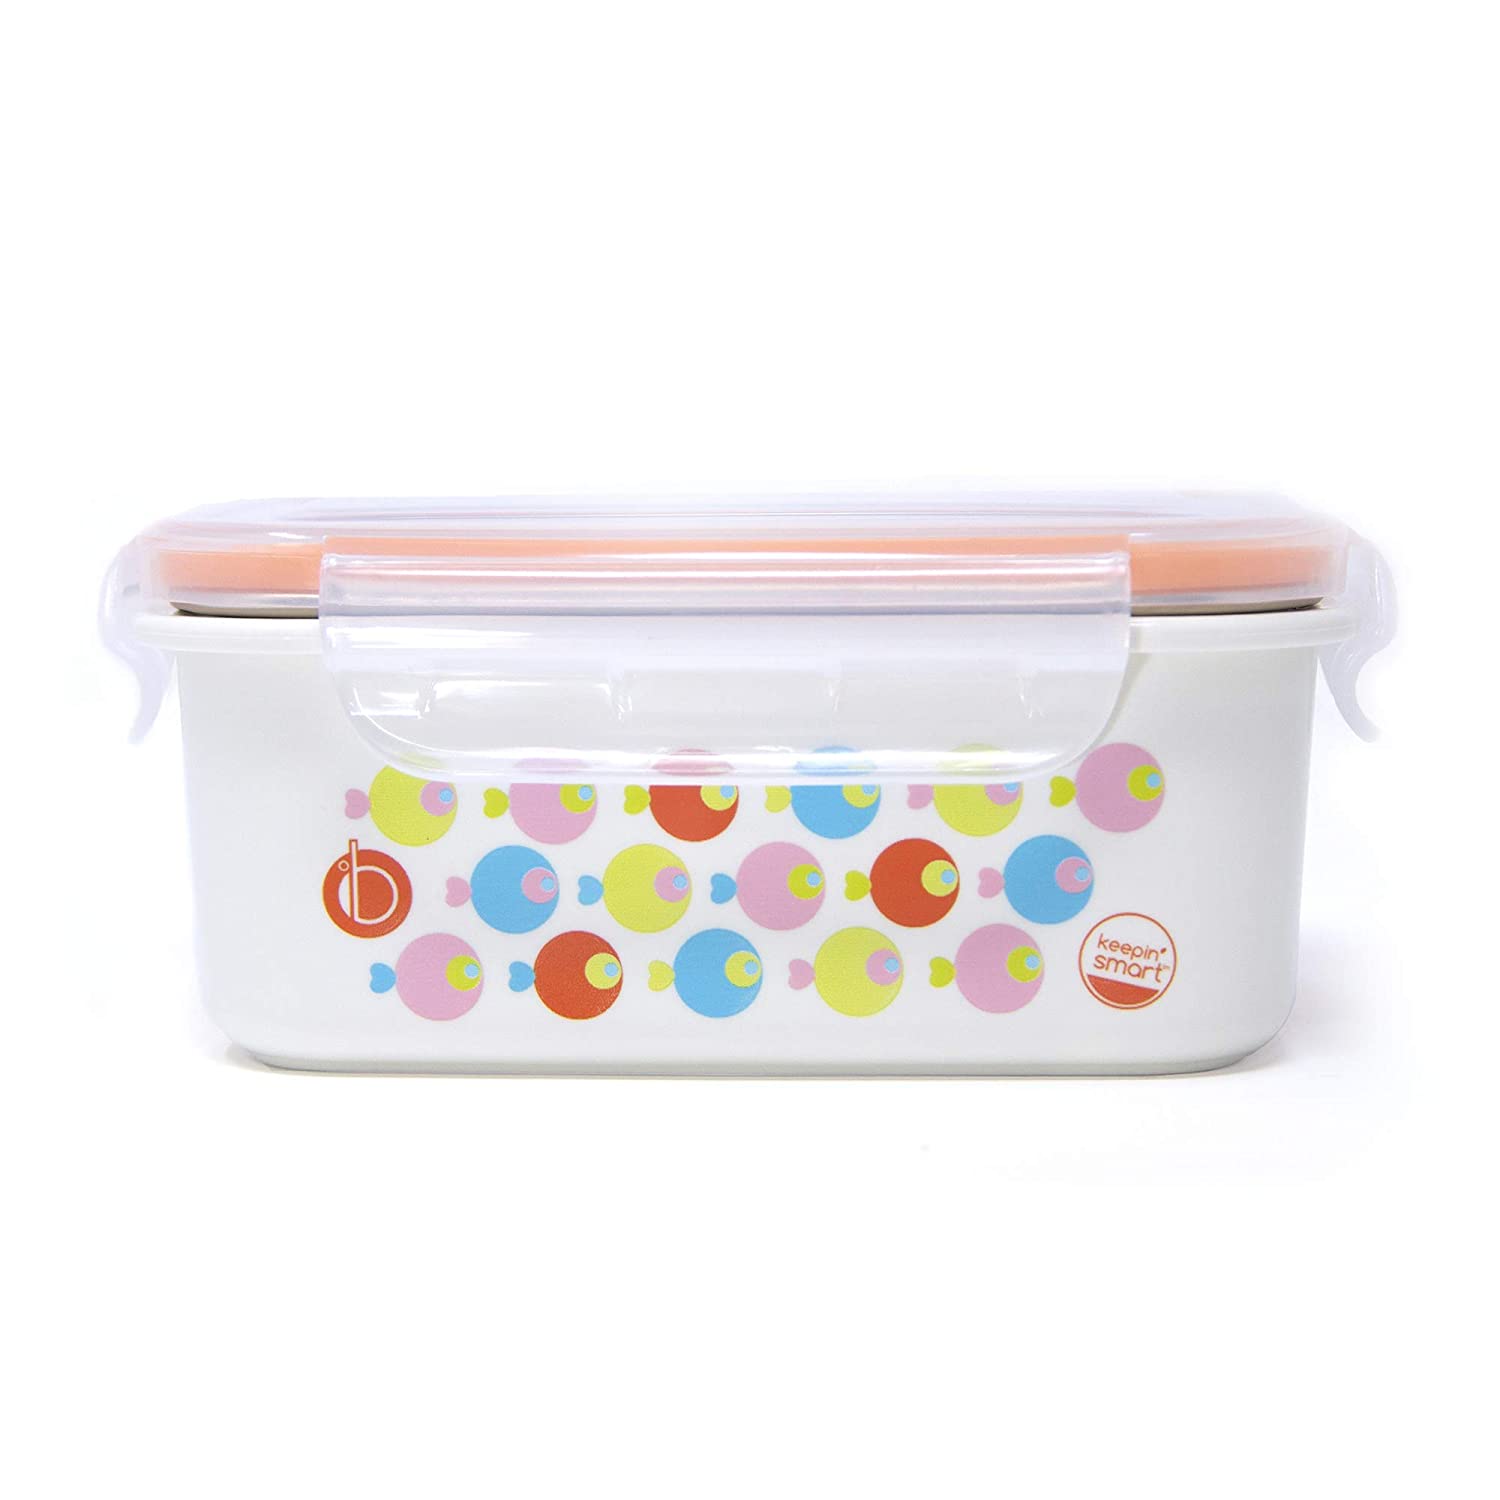 Innobaby Keepin' Fresh Stainless Bento Snack or Lunch Box with Lid for Kids and Toddlers 15 oz, BPA Free Food Storage, Orange Fish